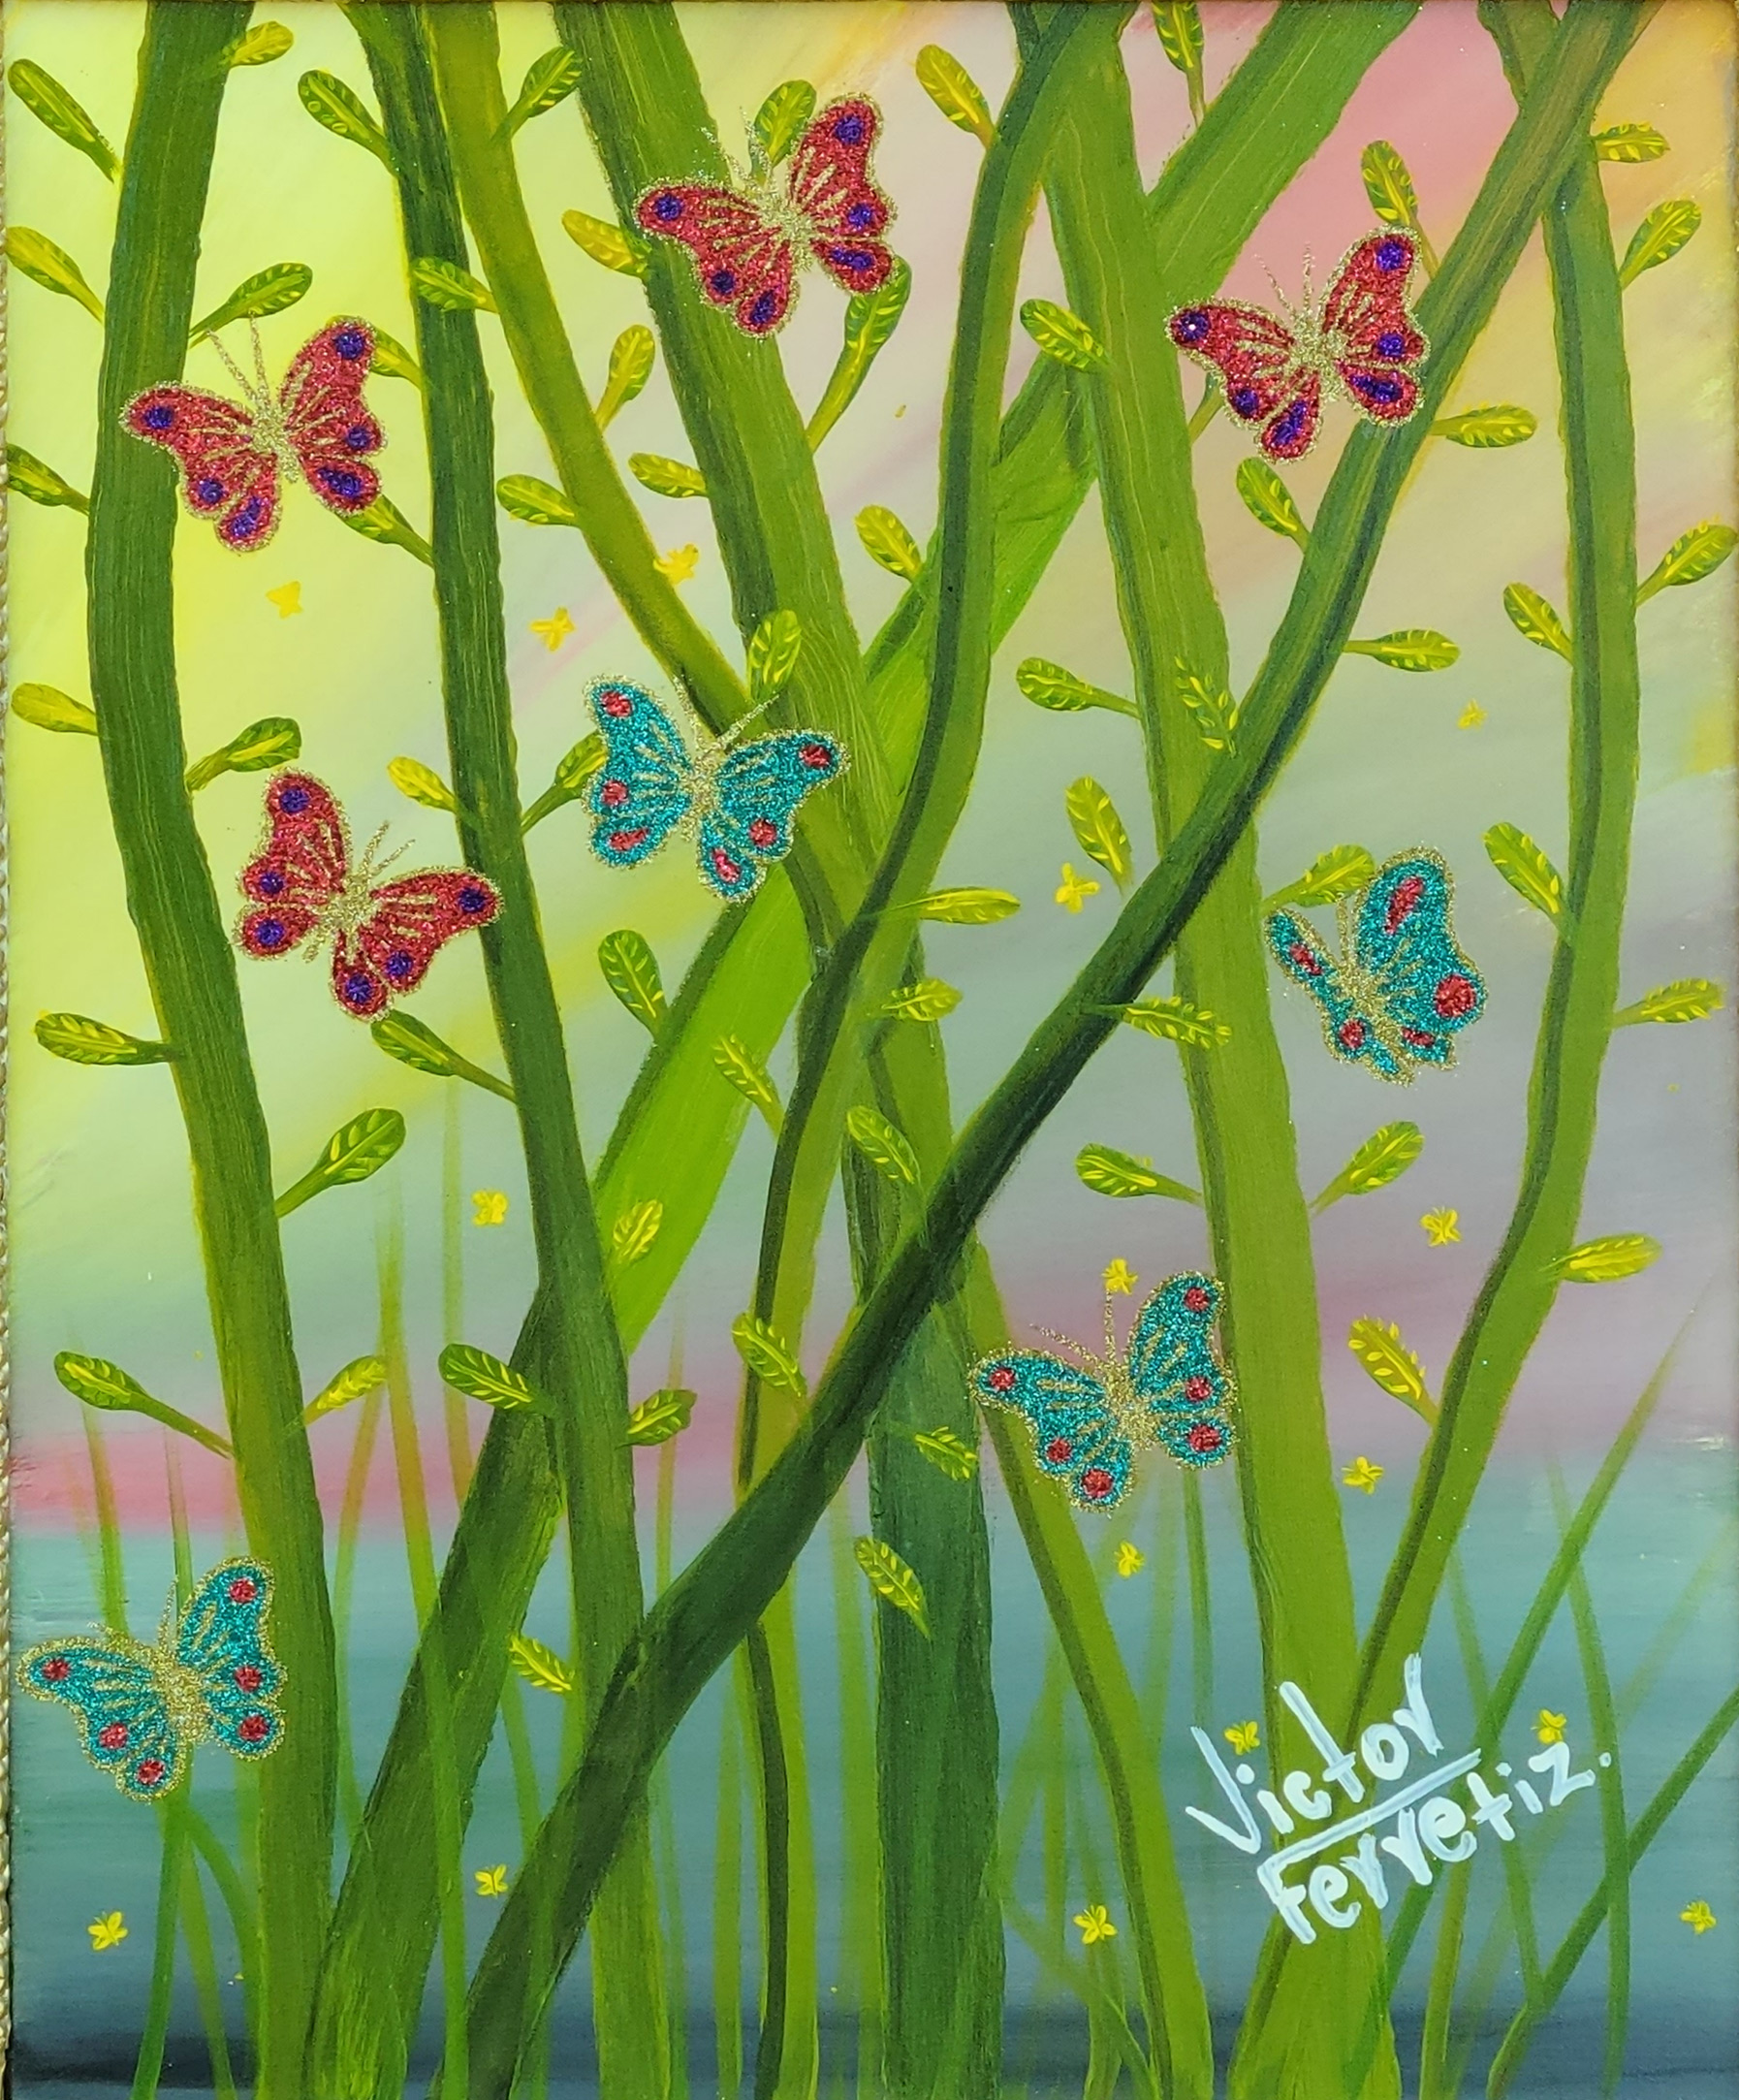 This painting comes with a hand-painted antique frame, so this might have minor scratches due to age. This original artwork depicts a group of butterflies flying behind softstem bulrush plants over a misty lake where no one can disturb them.